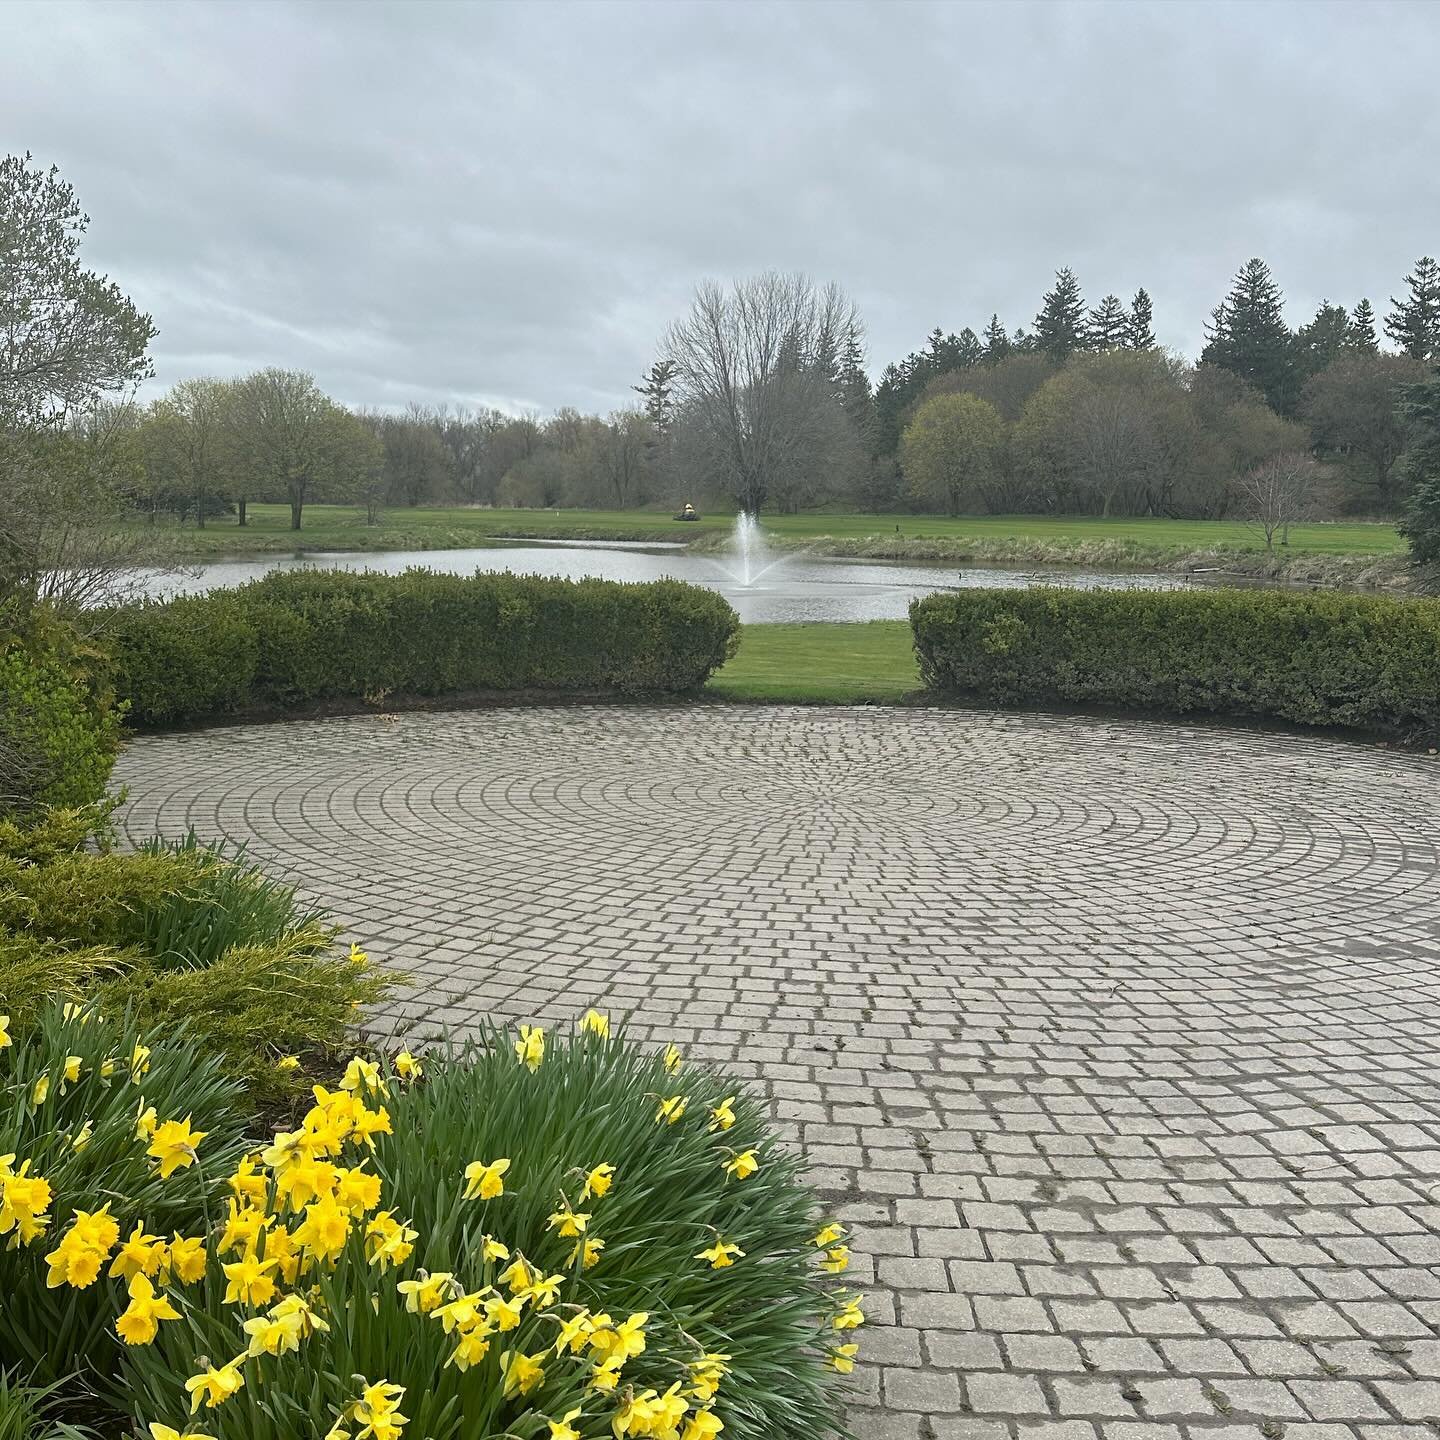 April showers bring May 🌸 
The course is greening up nicely and the guys in the back are hard at it.

League Members - you&rsquo;re able to book your tee times for our first week of leagues that start May 6th. 

Our Ladies &amp; Mixed leagues are fu